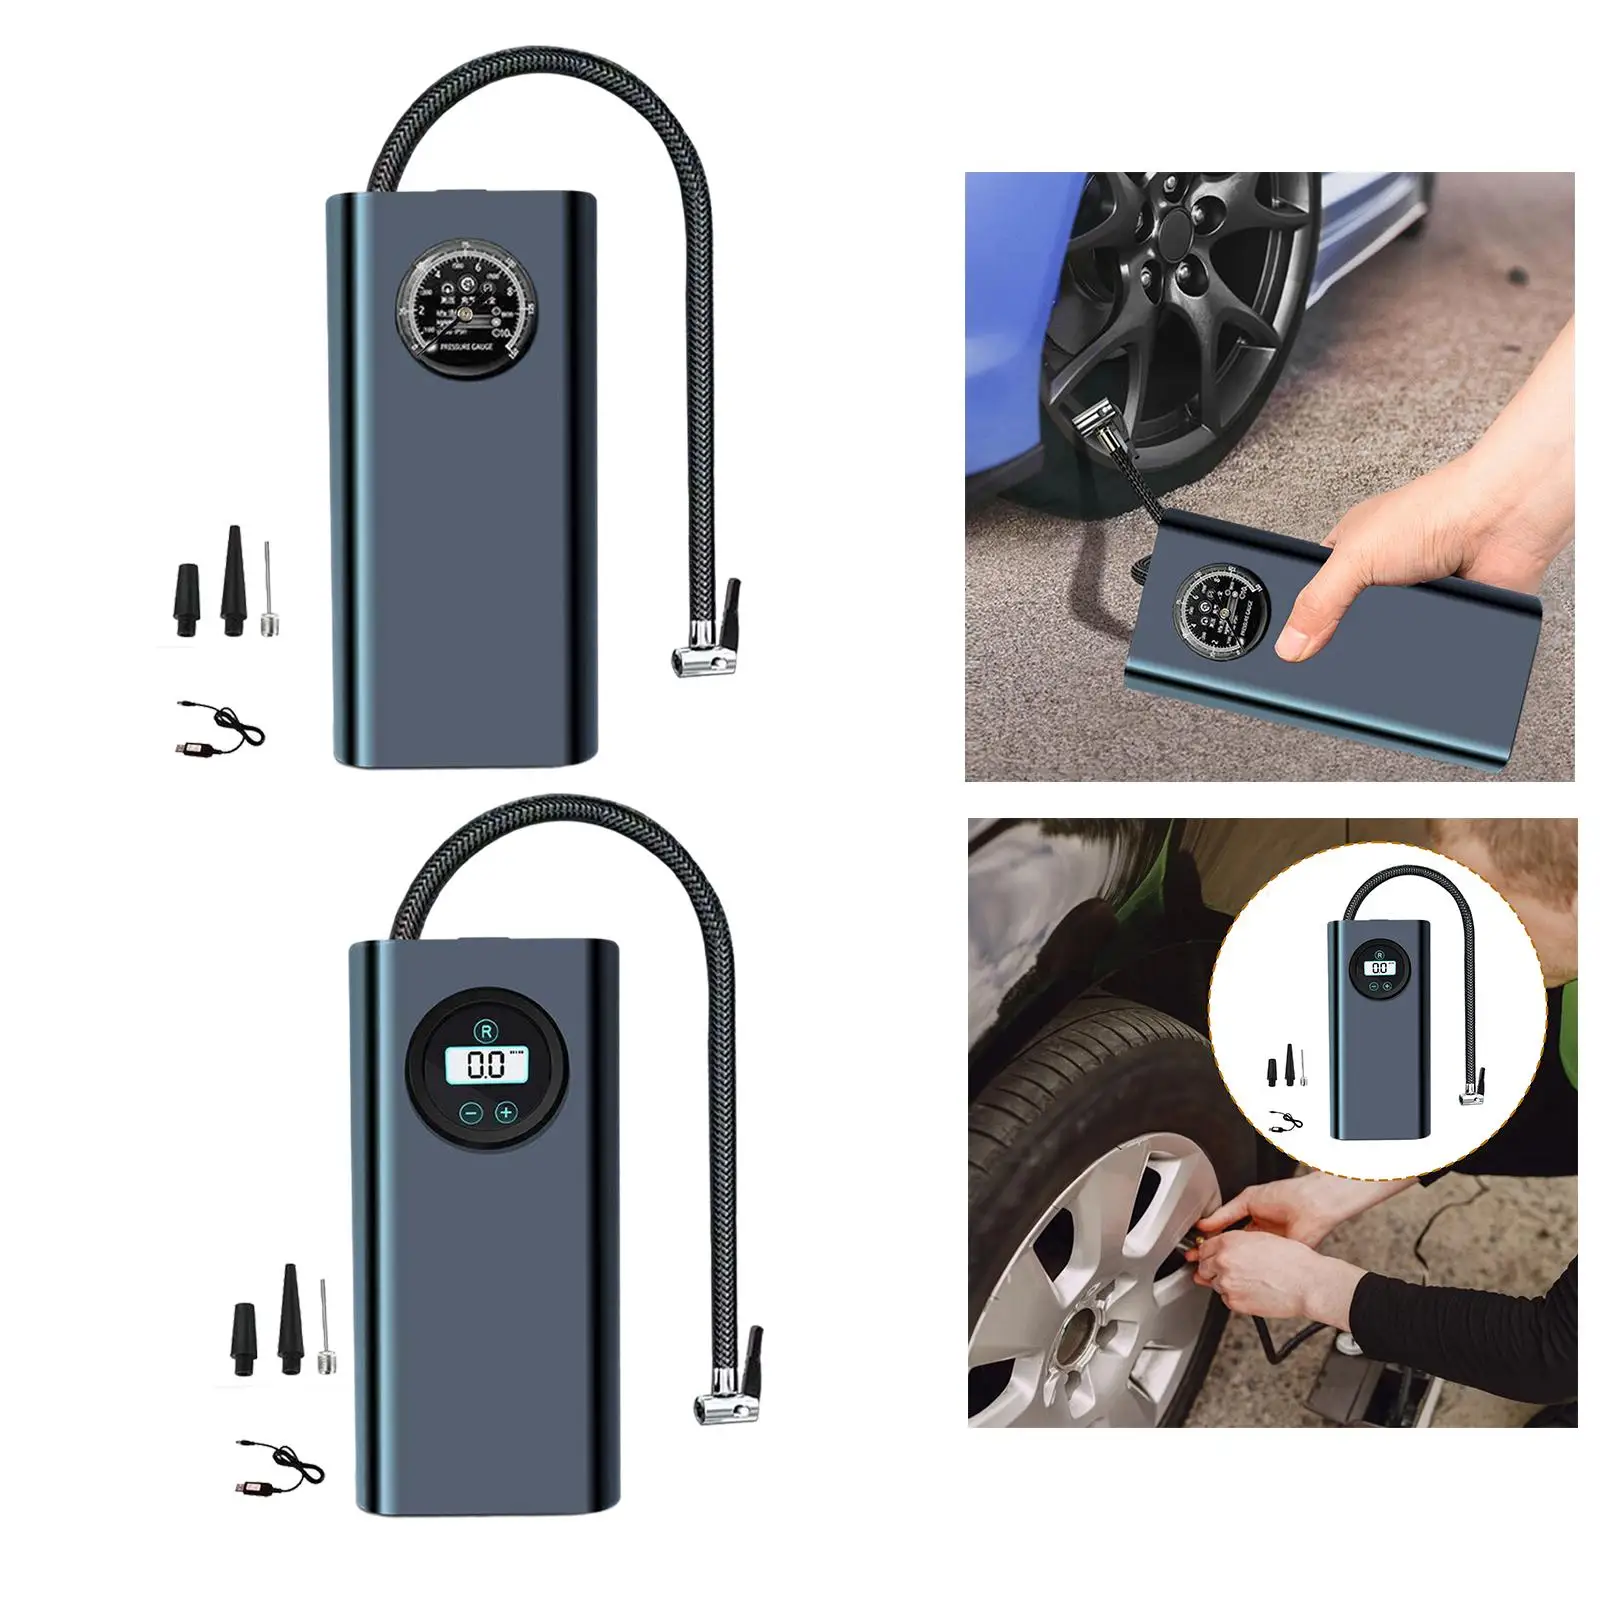 Cordless Tire Inflator Portable Air Compressor for Cars Motorcycle SUV